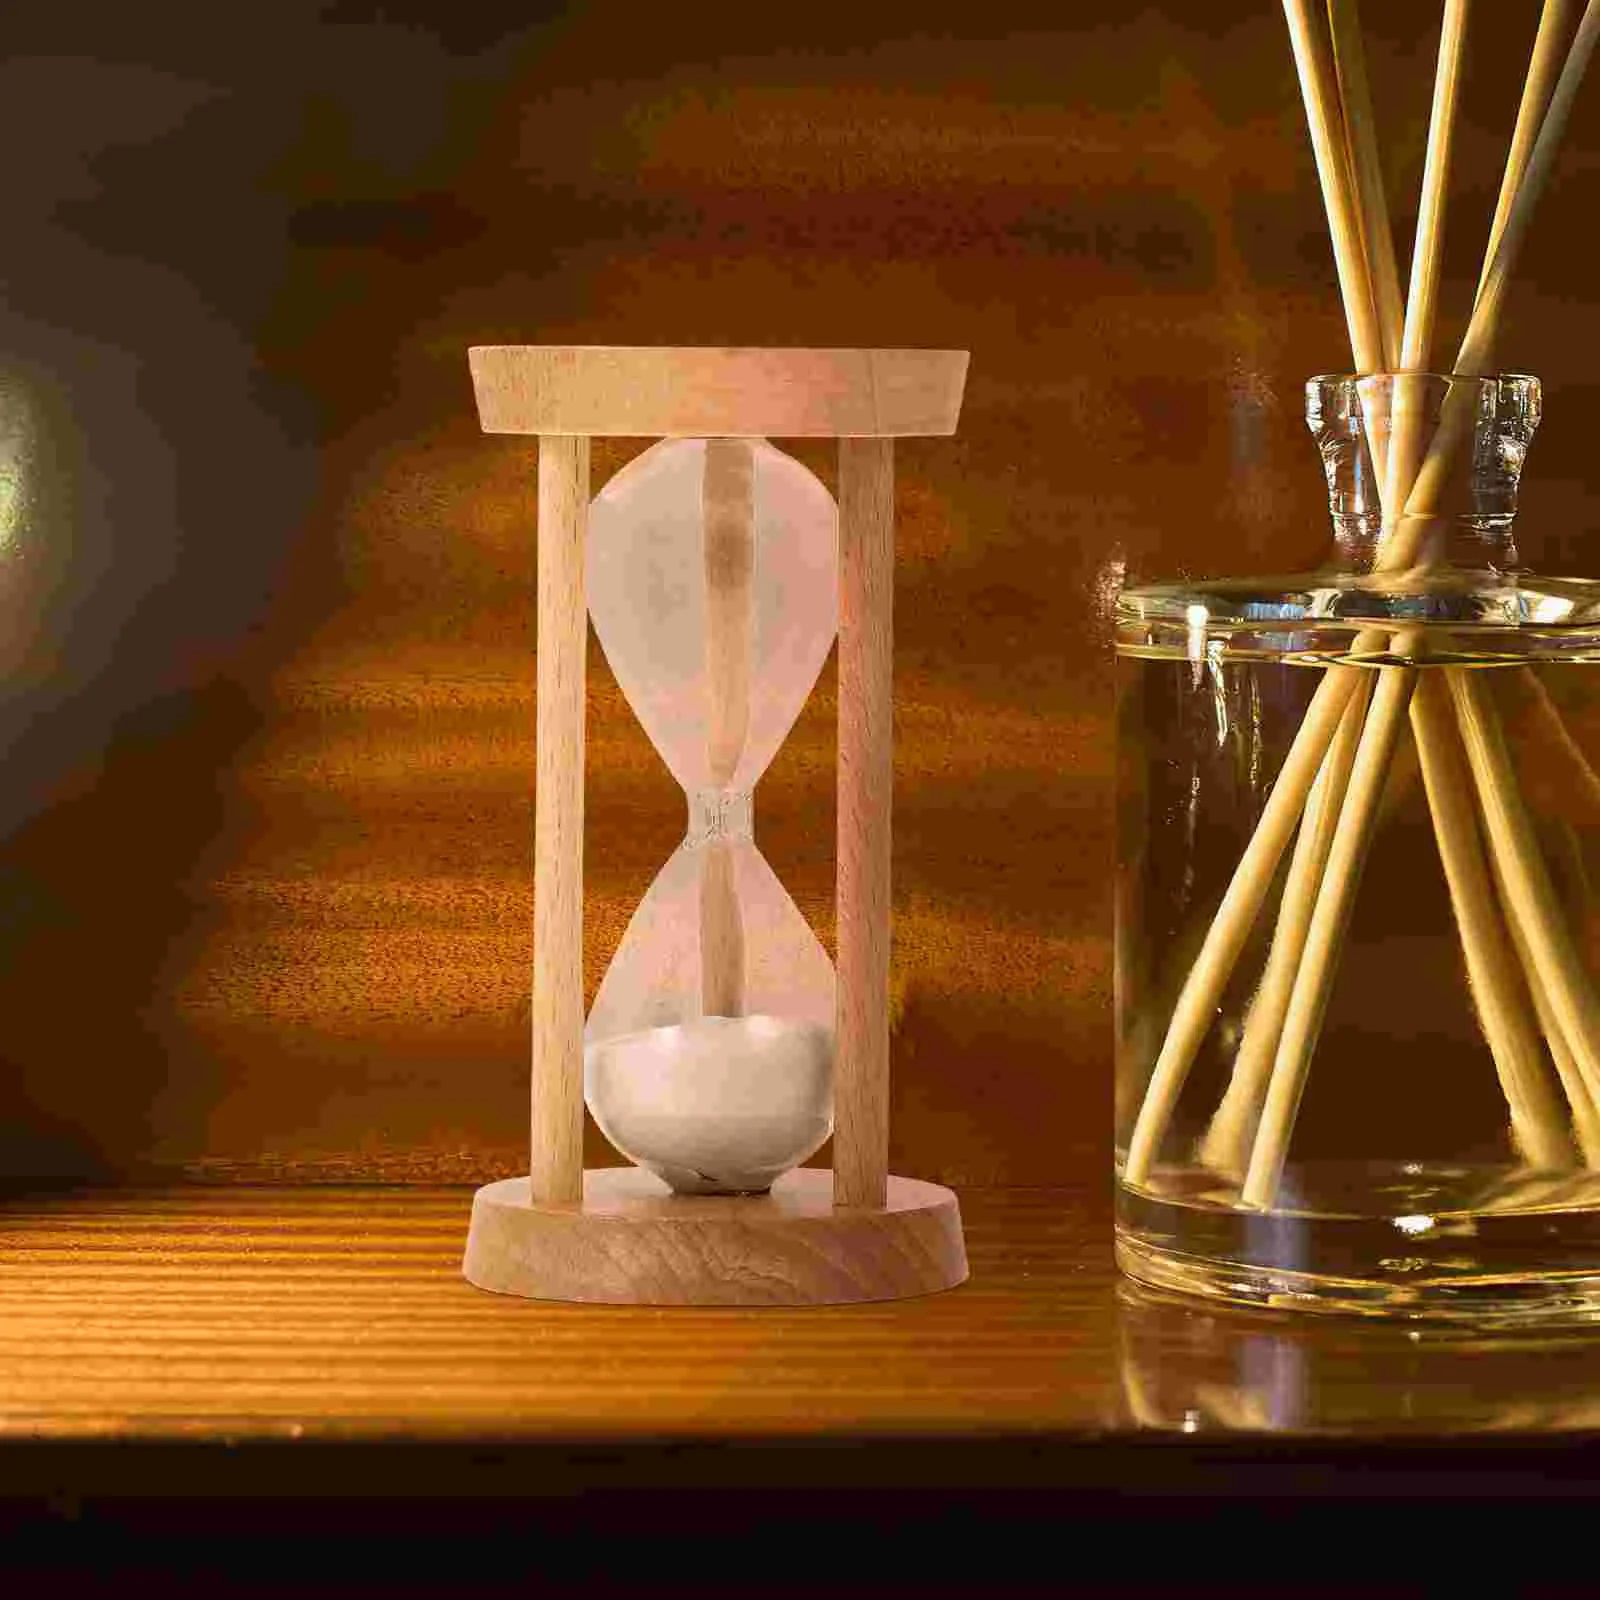 

5 Minutes Hourglass Timer Wood Sand Timer Small Sand Clock Vintage Sand Watch Hour Glass Wooden Timers Hour Brass